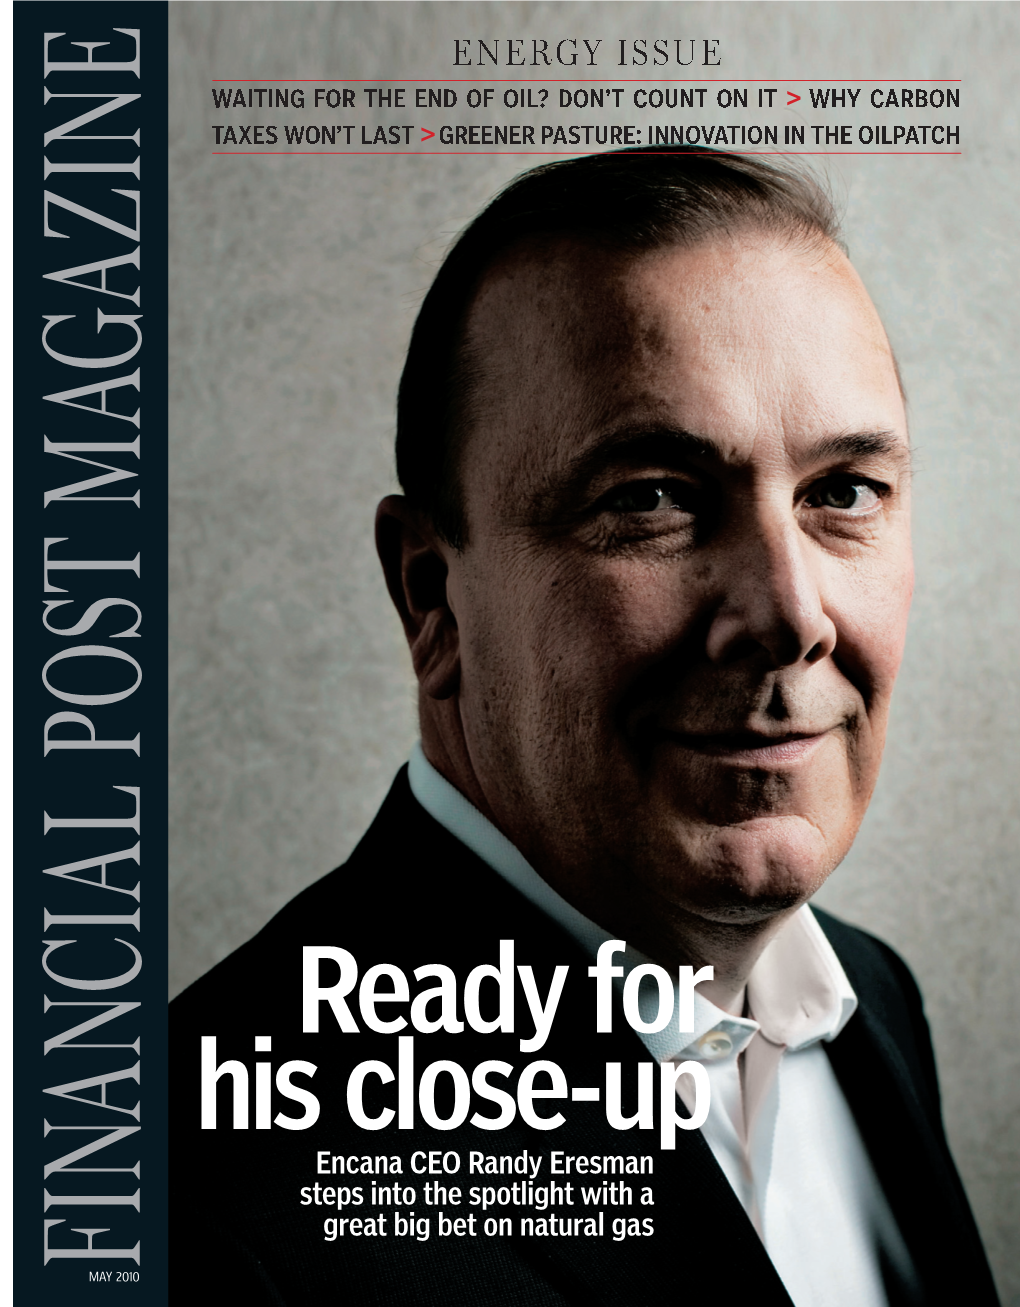 FINANCIAL POST MAGAZINE (EDITORIAL) 34 1450 Don Mills Road, Suite 300 FAMILY FINANCE